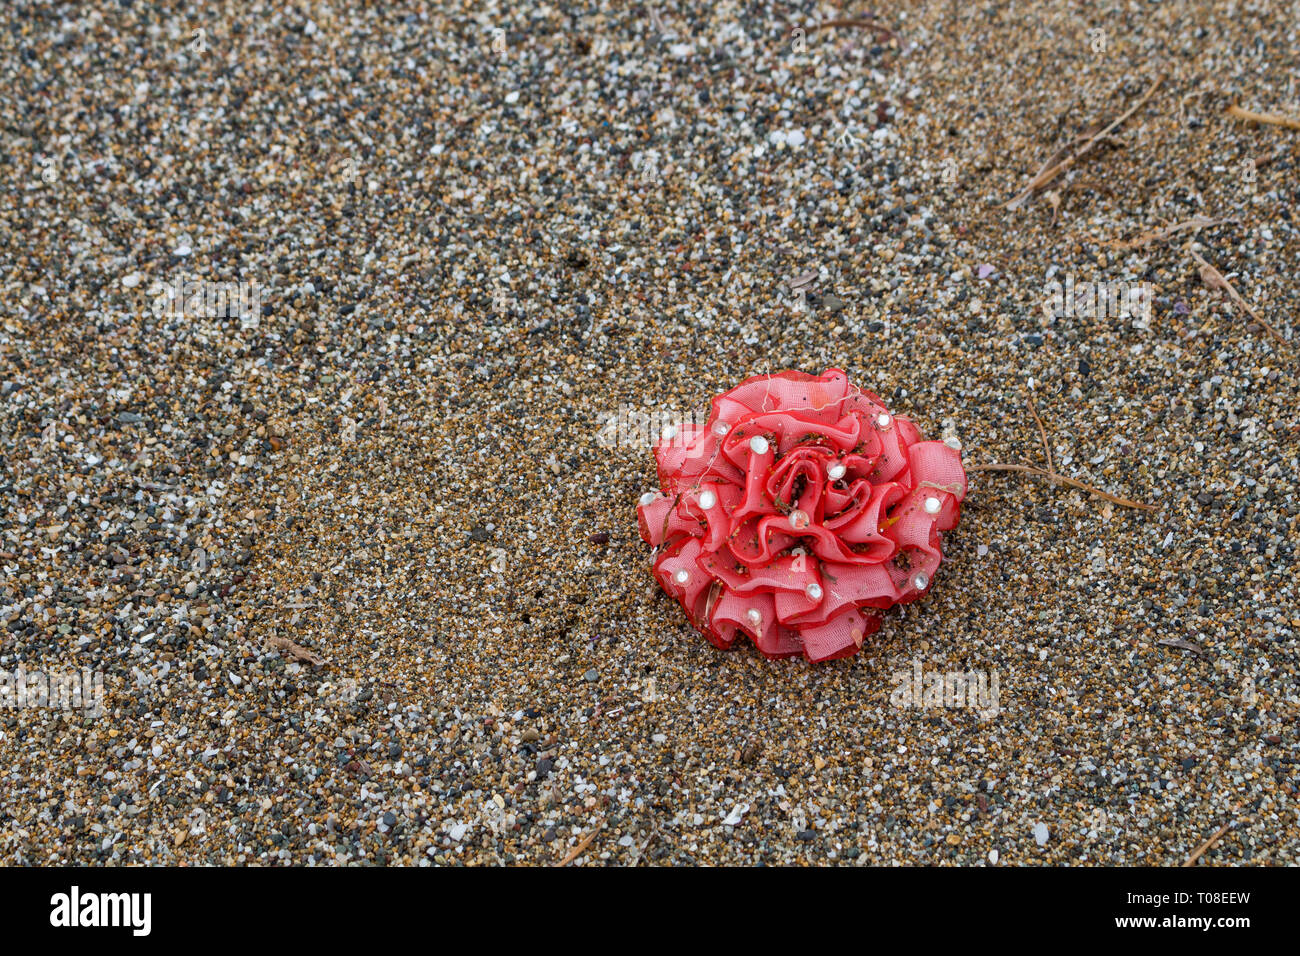 Red flower on the leastic hair bands, forgotten or lost on the beach.  Part of the set Beach discoveries. Crete, Greece. Stock Photo